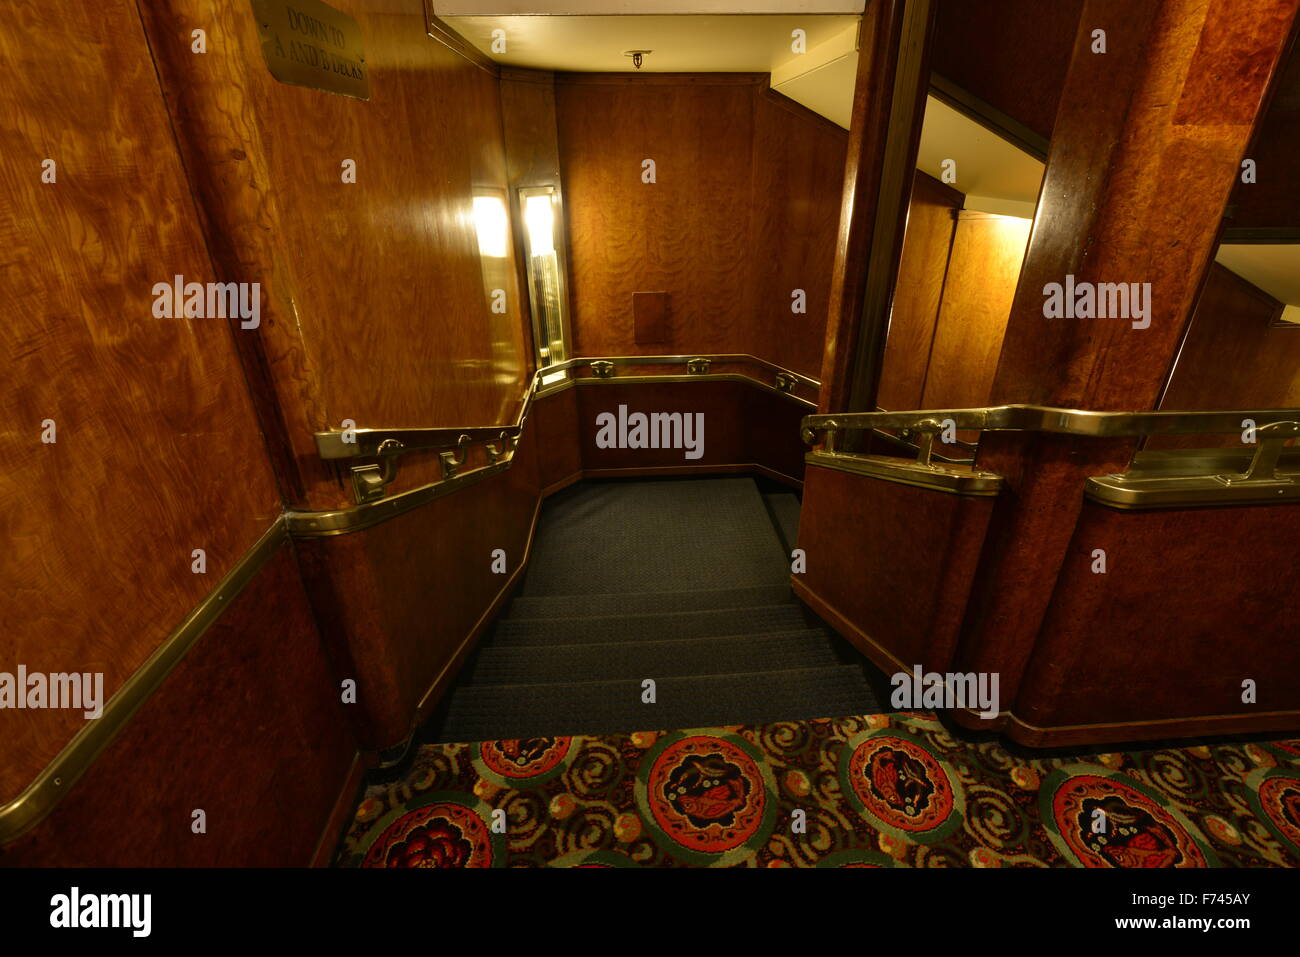 The interior of the Liner the RMS Queen Mary. Stock Photo